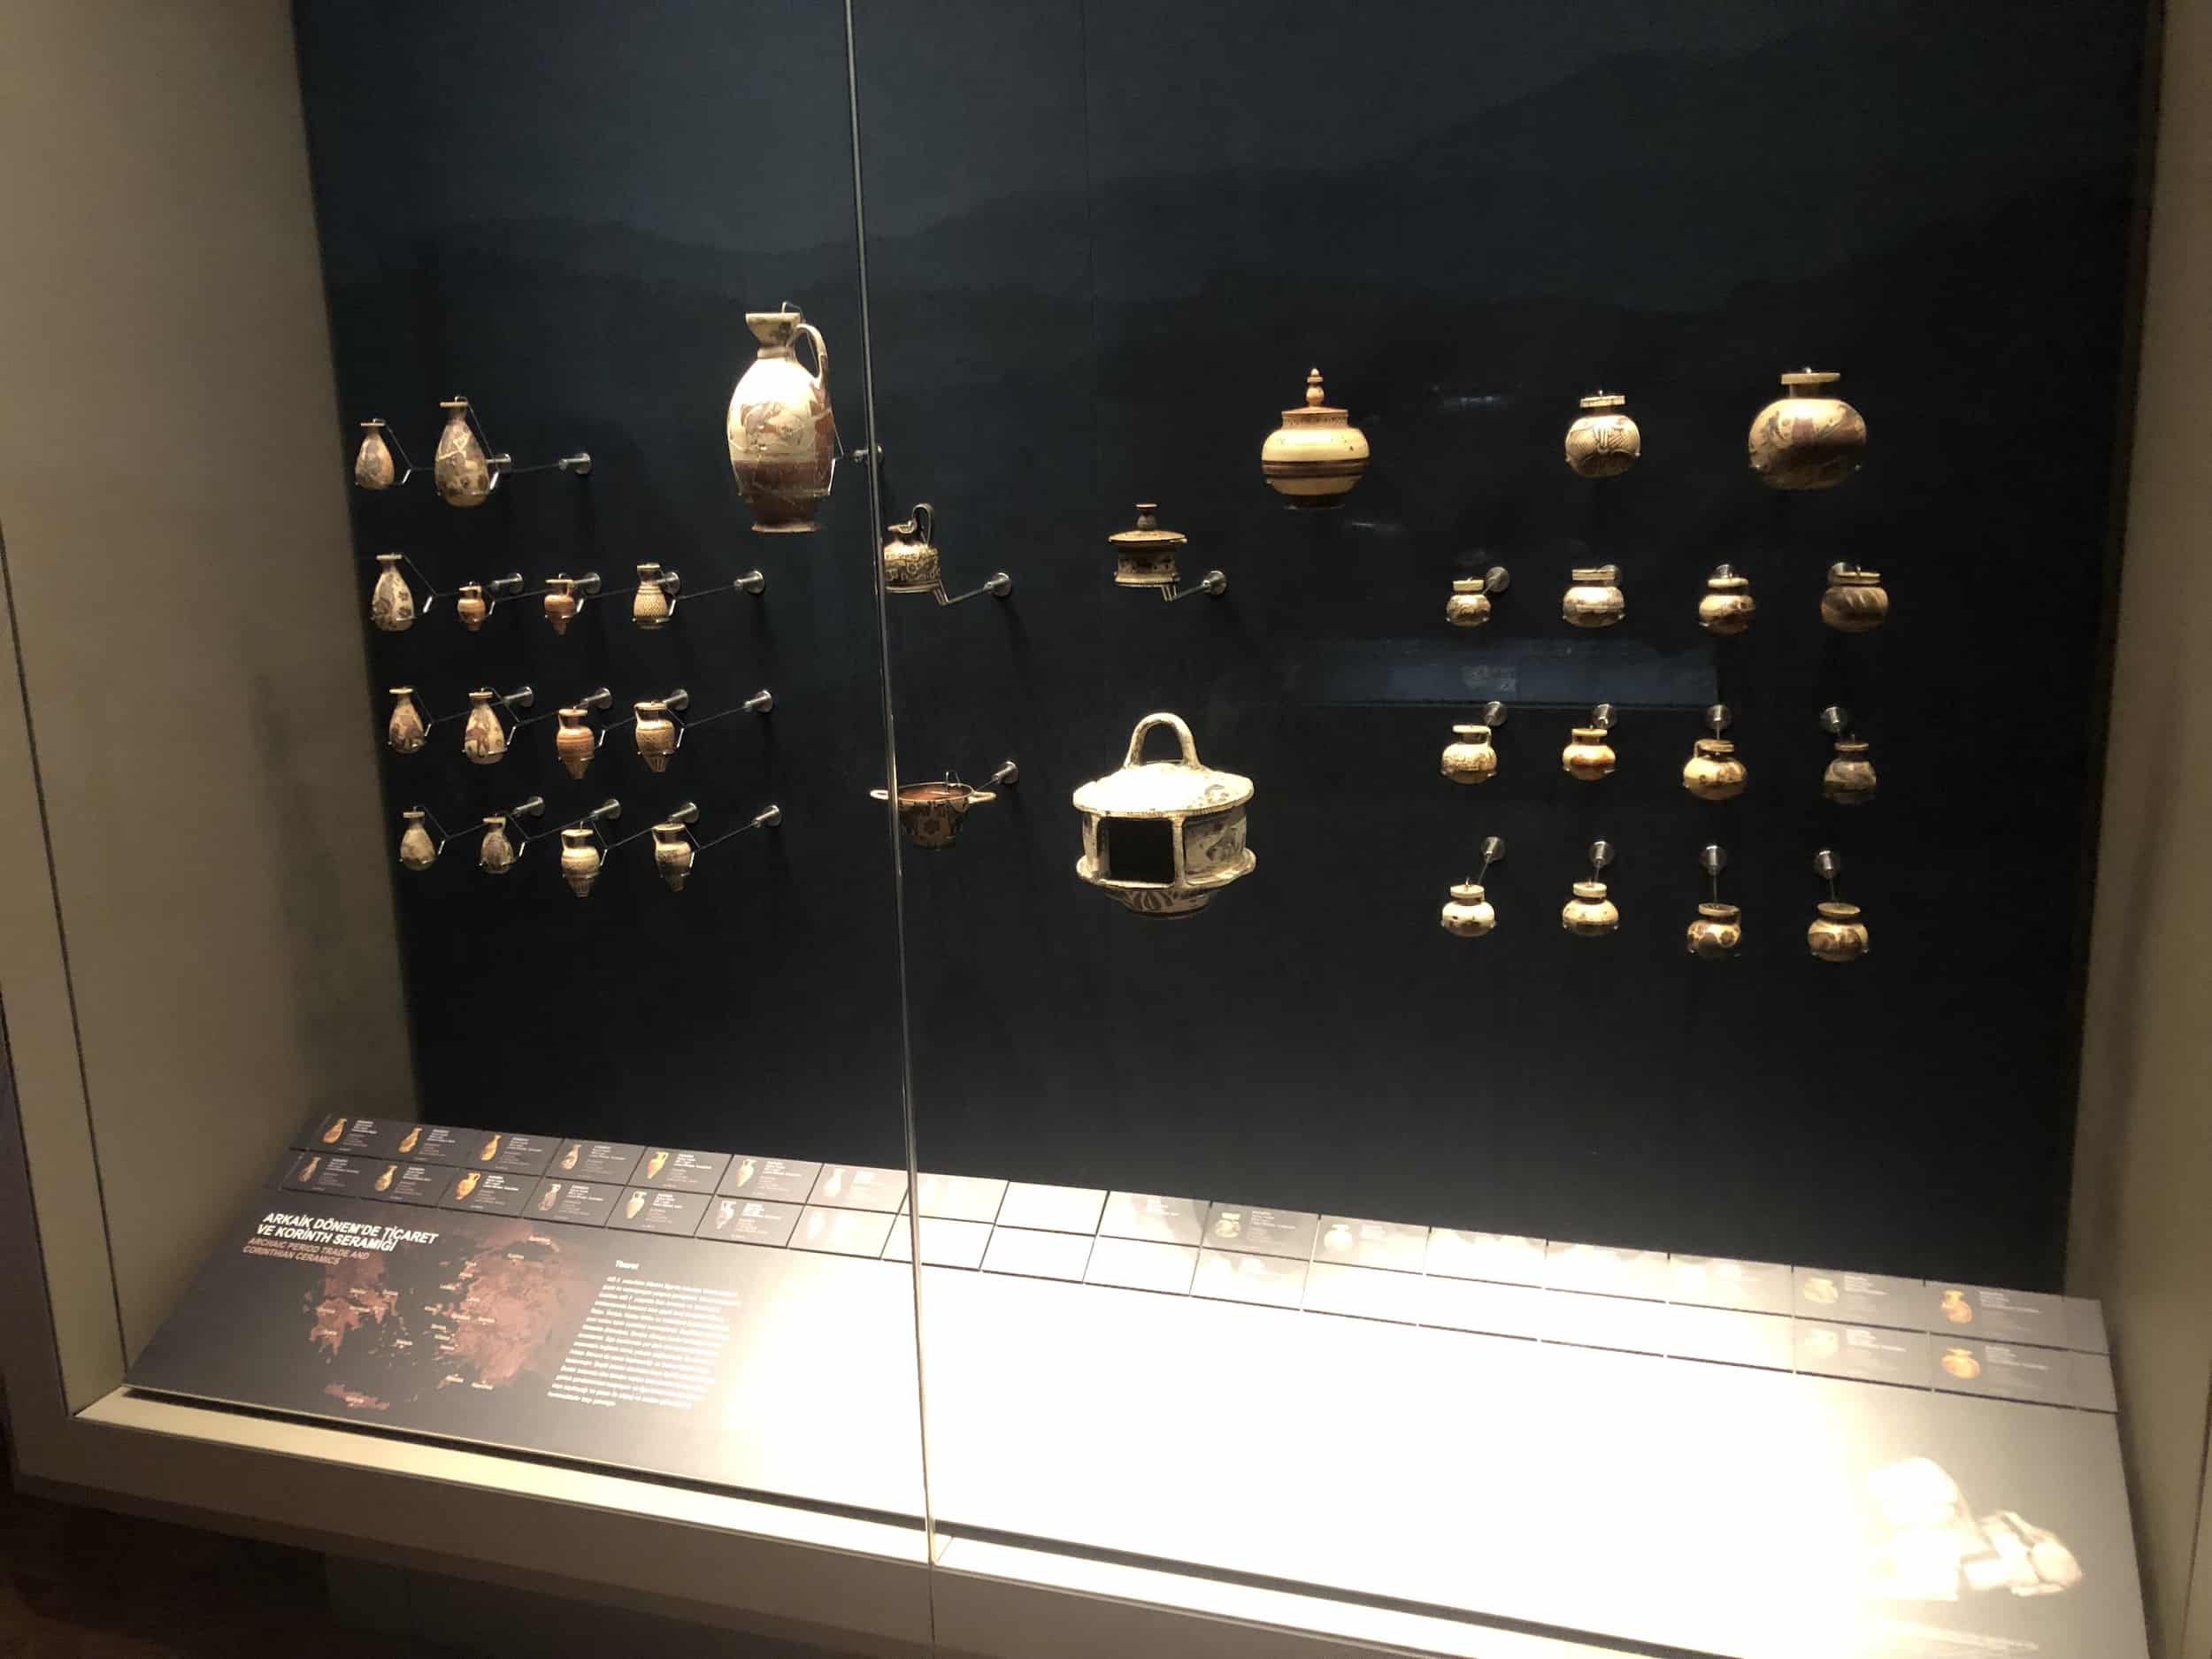 Archaic period trade and Corinthian ceramics at the Istanbul Archaeology Museum in Istanbul, Turkey